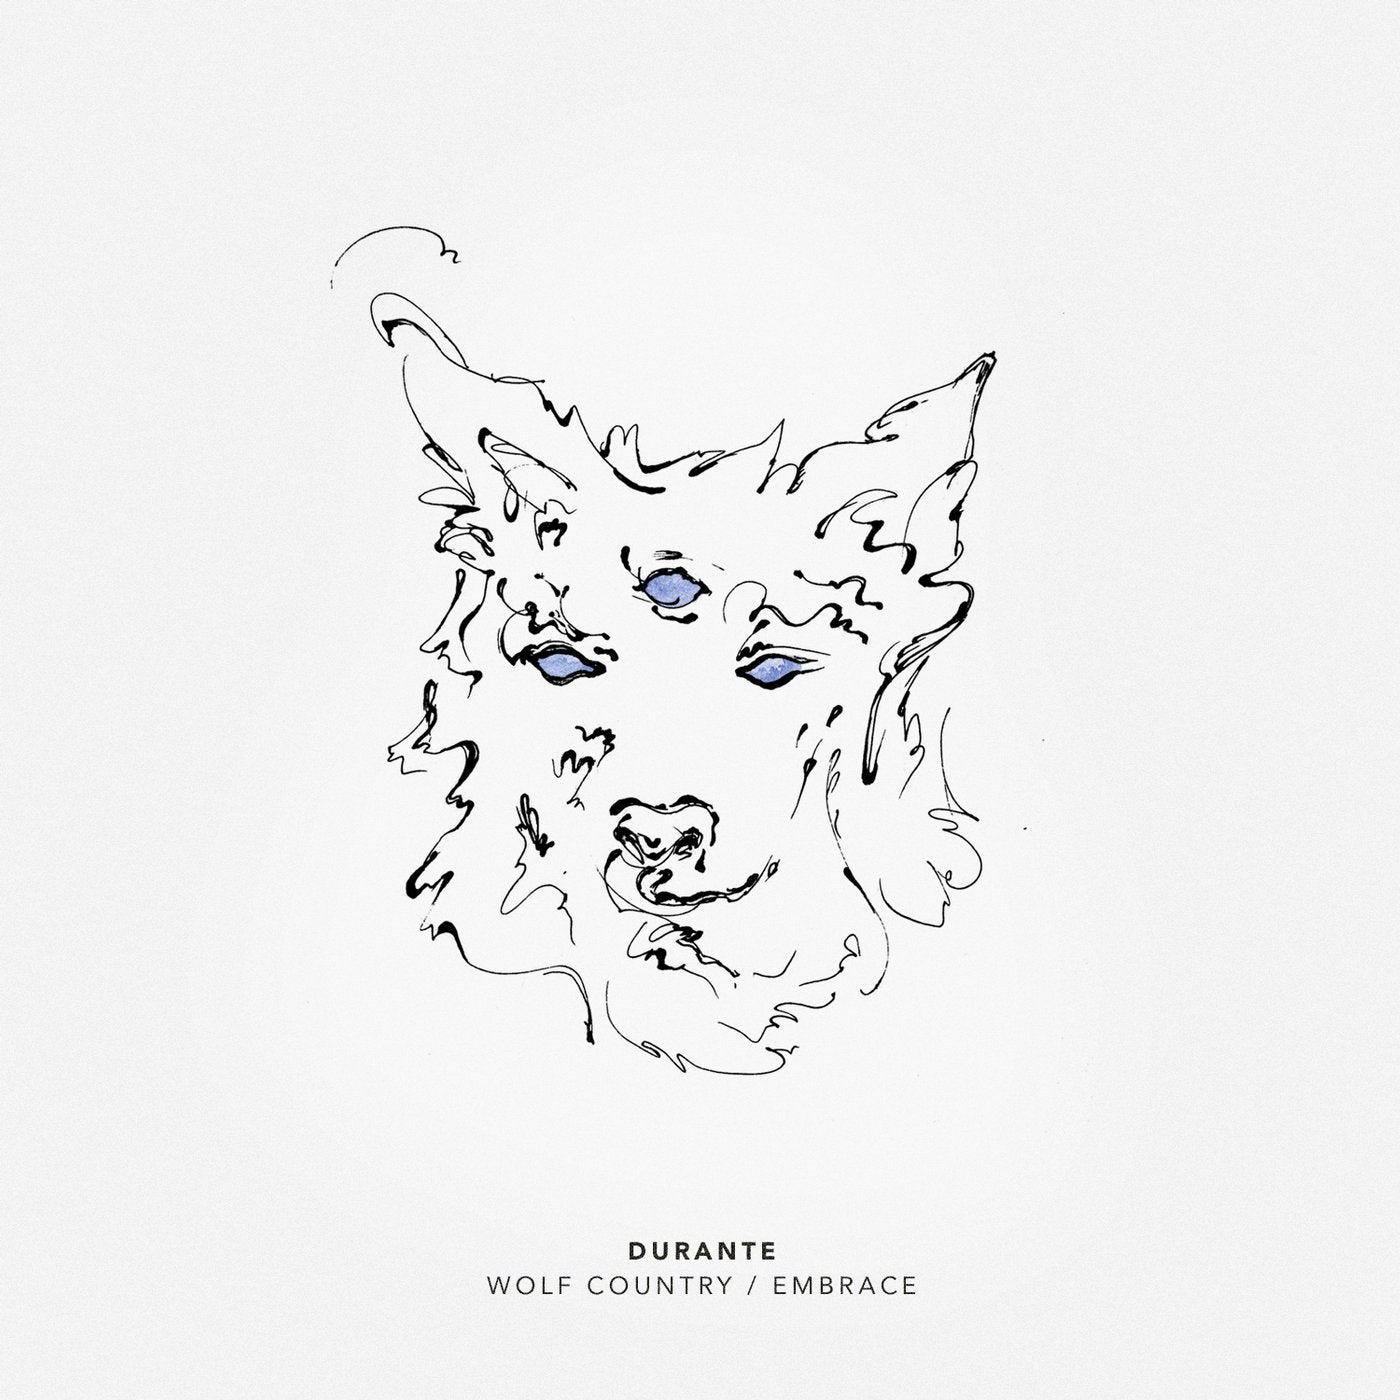 Wolf Country / Embrace